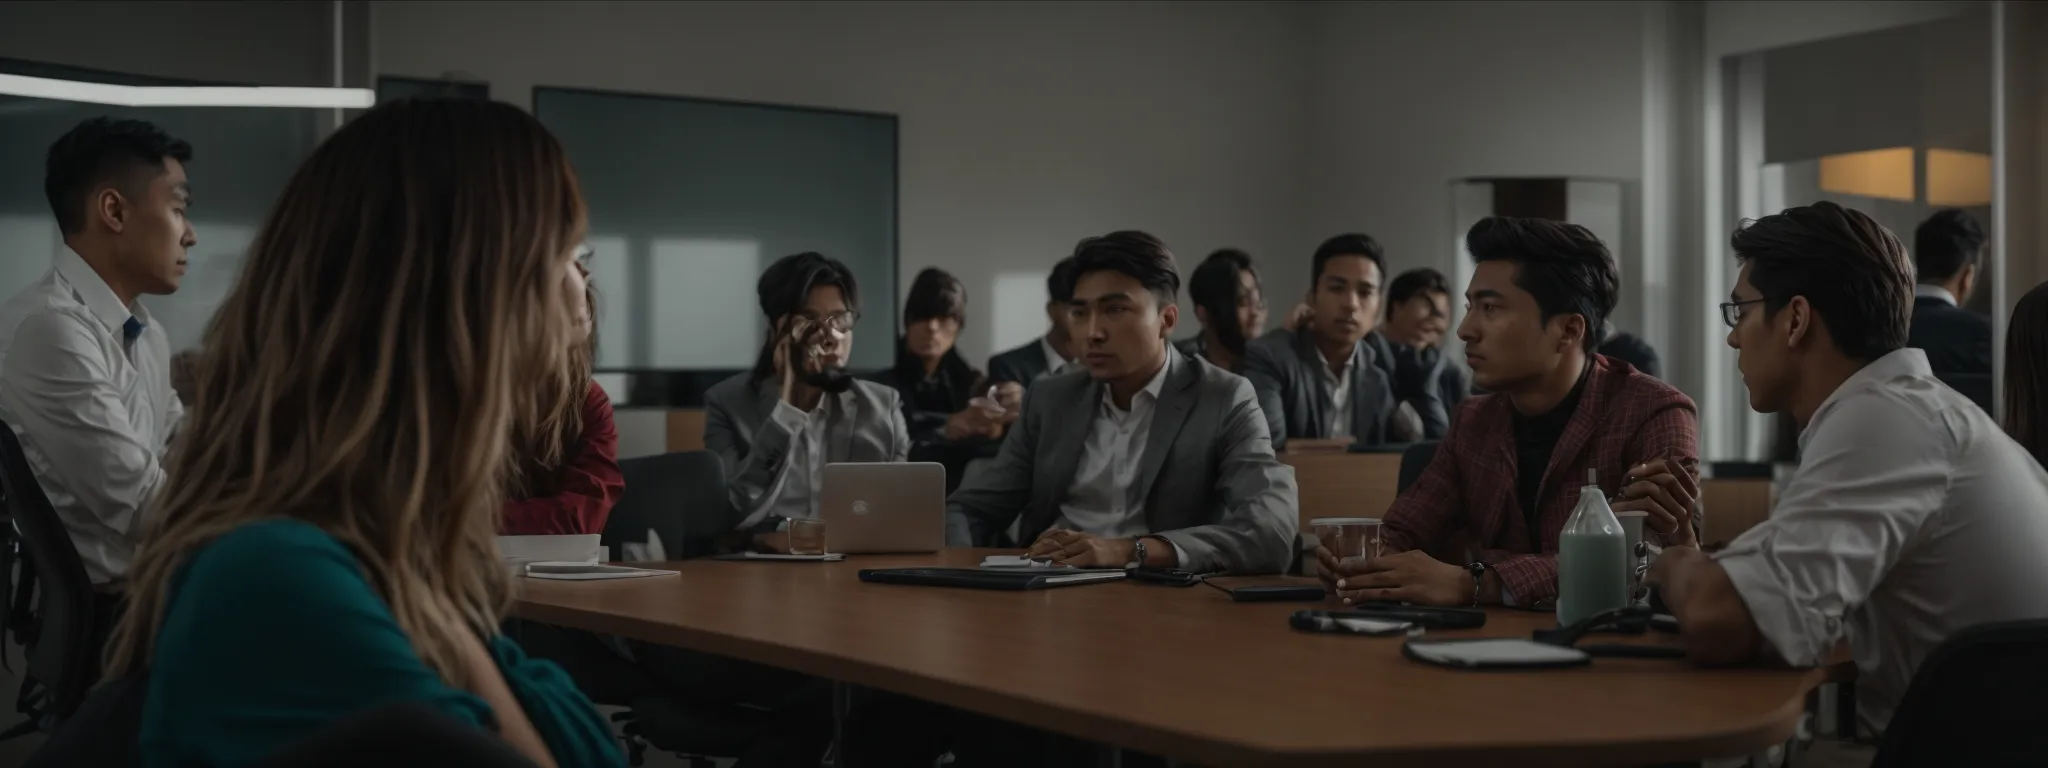 a group of concerned seo professionals gathers in a conference room, engaged in a heated discussion over the latest google algorithm update.